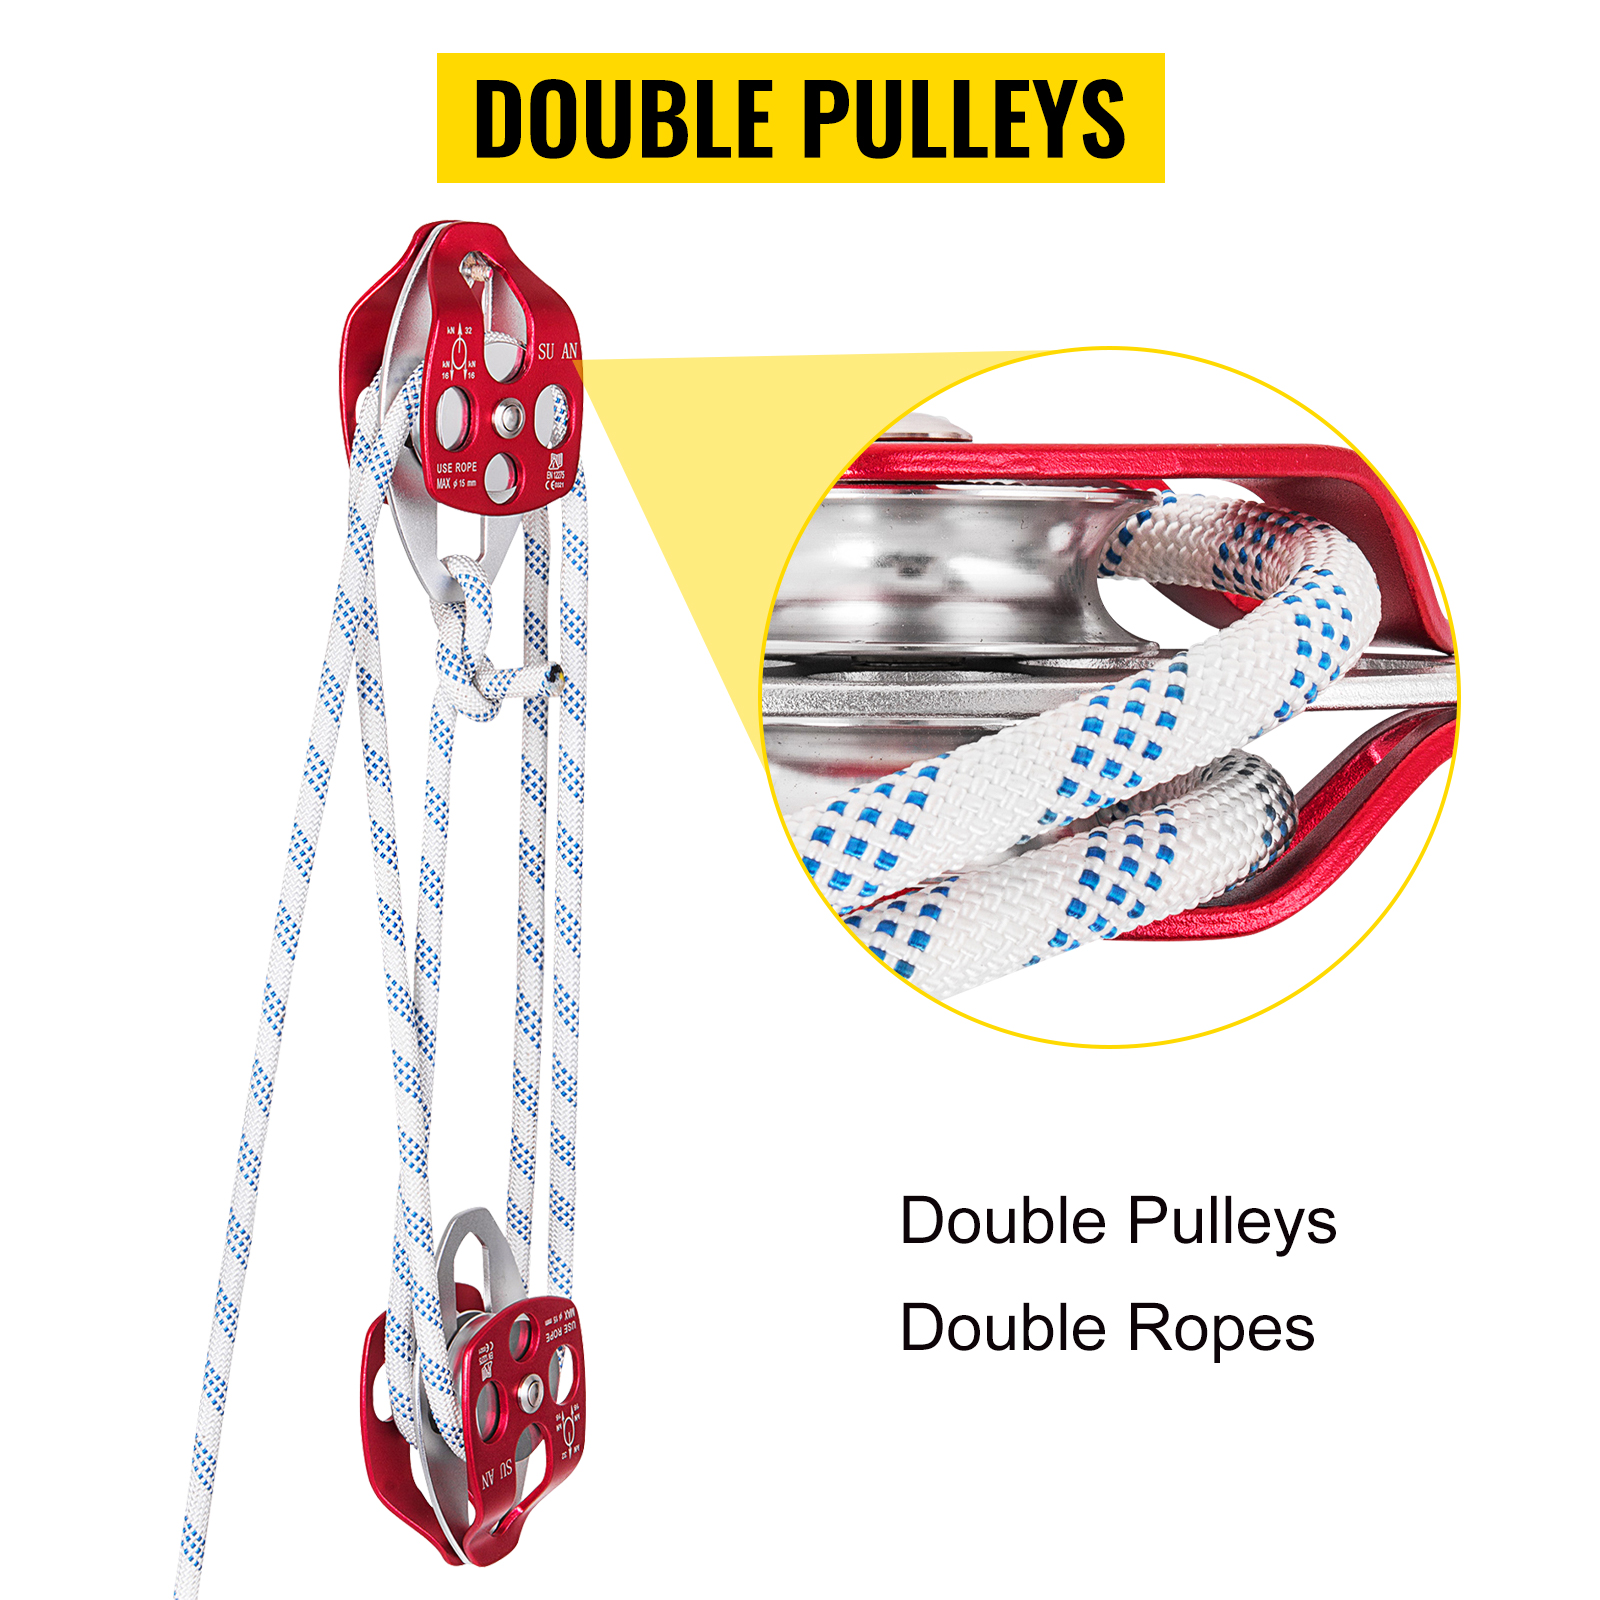 Twin sheave block and tackle 7500Lb pulley system 150 feet 1/2 Double Braid Rope 